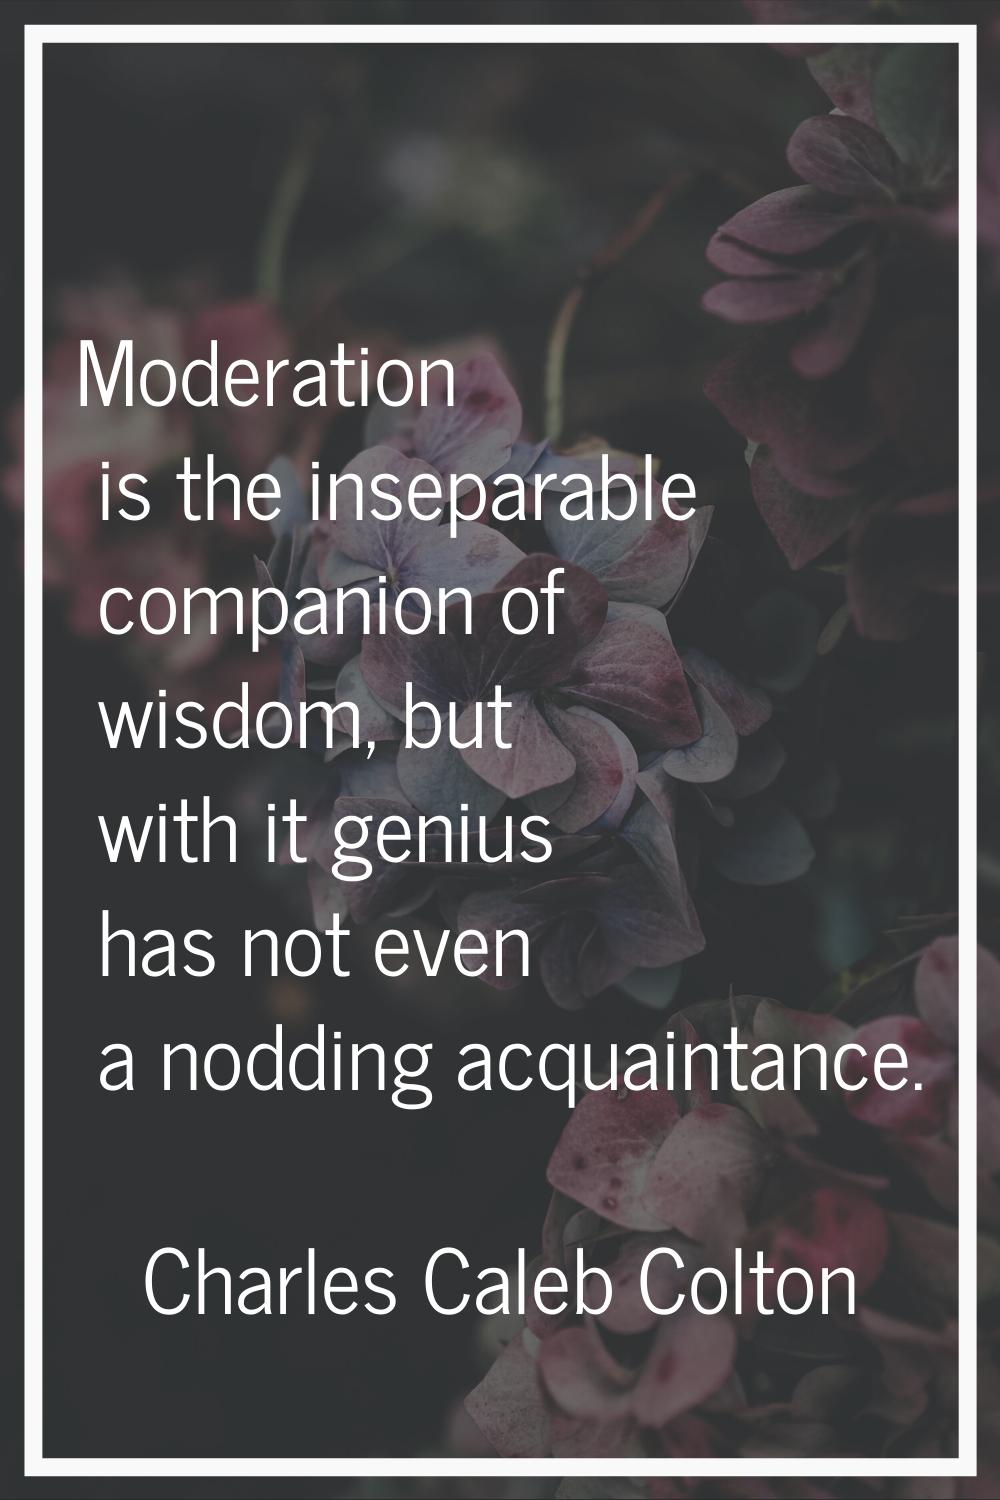 Moderation is the inseparable companion of wisdom, but with it genius has not even a nodding acquai